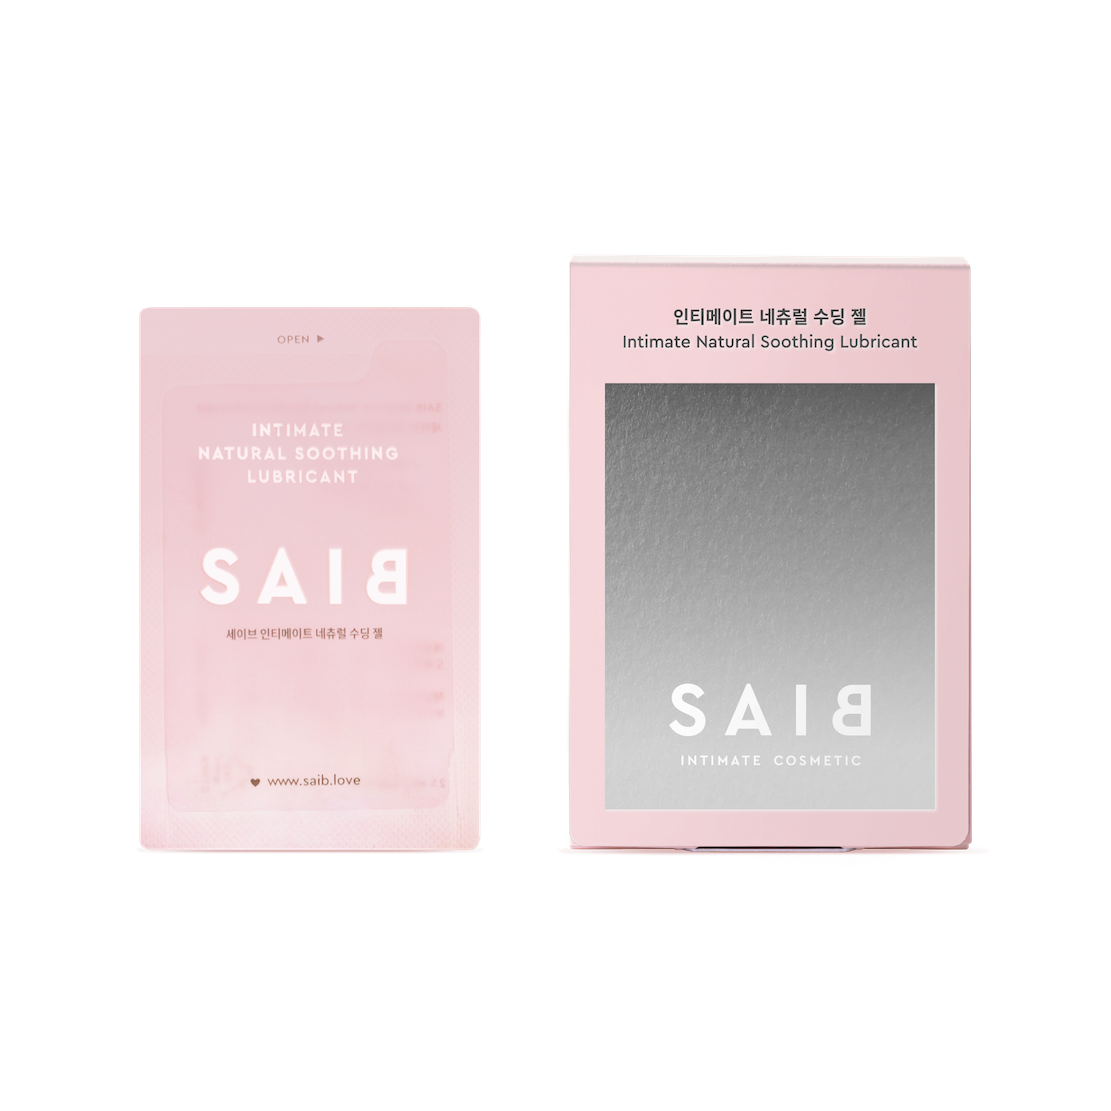 SAIB Intimate Natural Soothing Lubricant